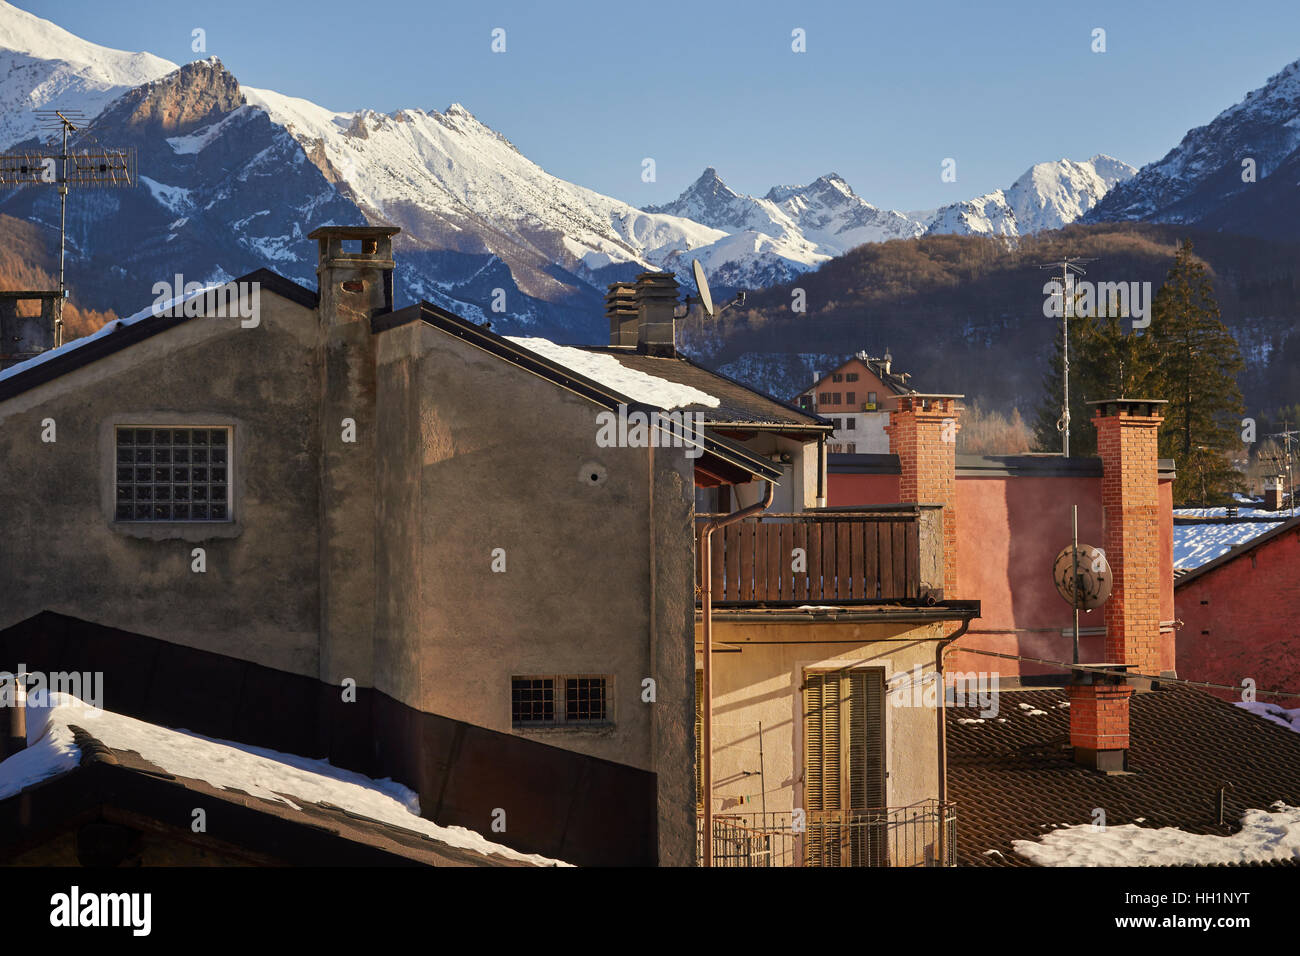 Village of Entracque, Cuneo, Piemonte, Italy. Italian Alps in the background. Stock Photo